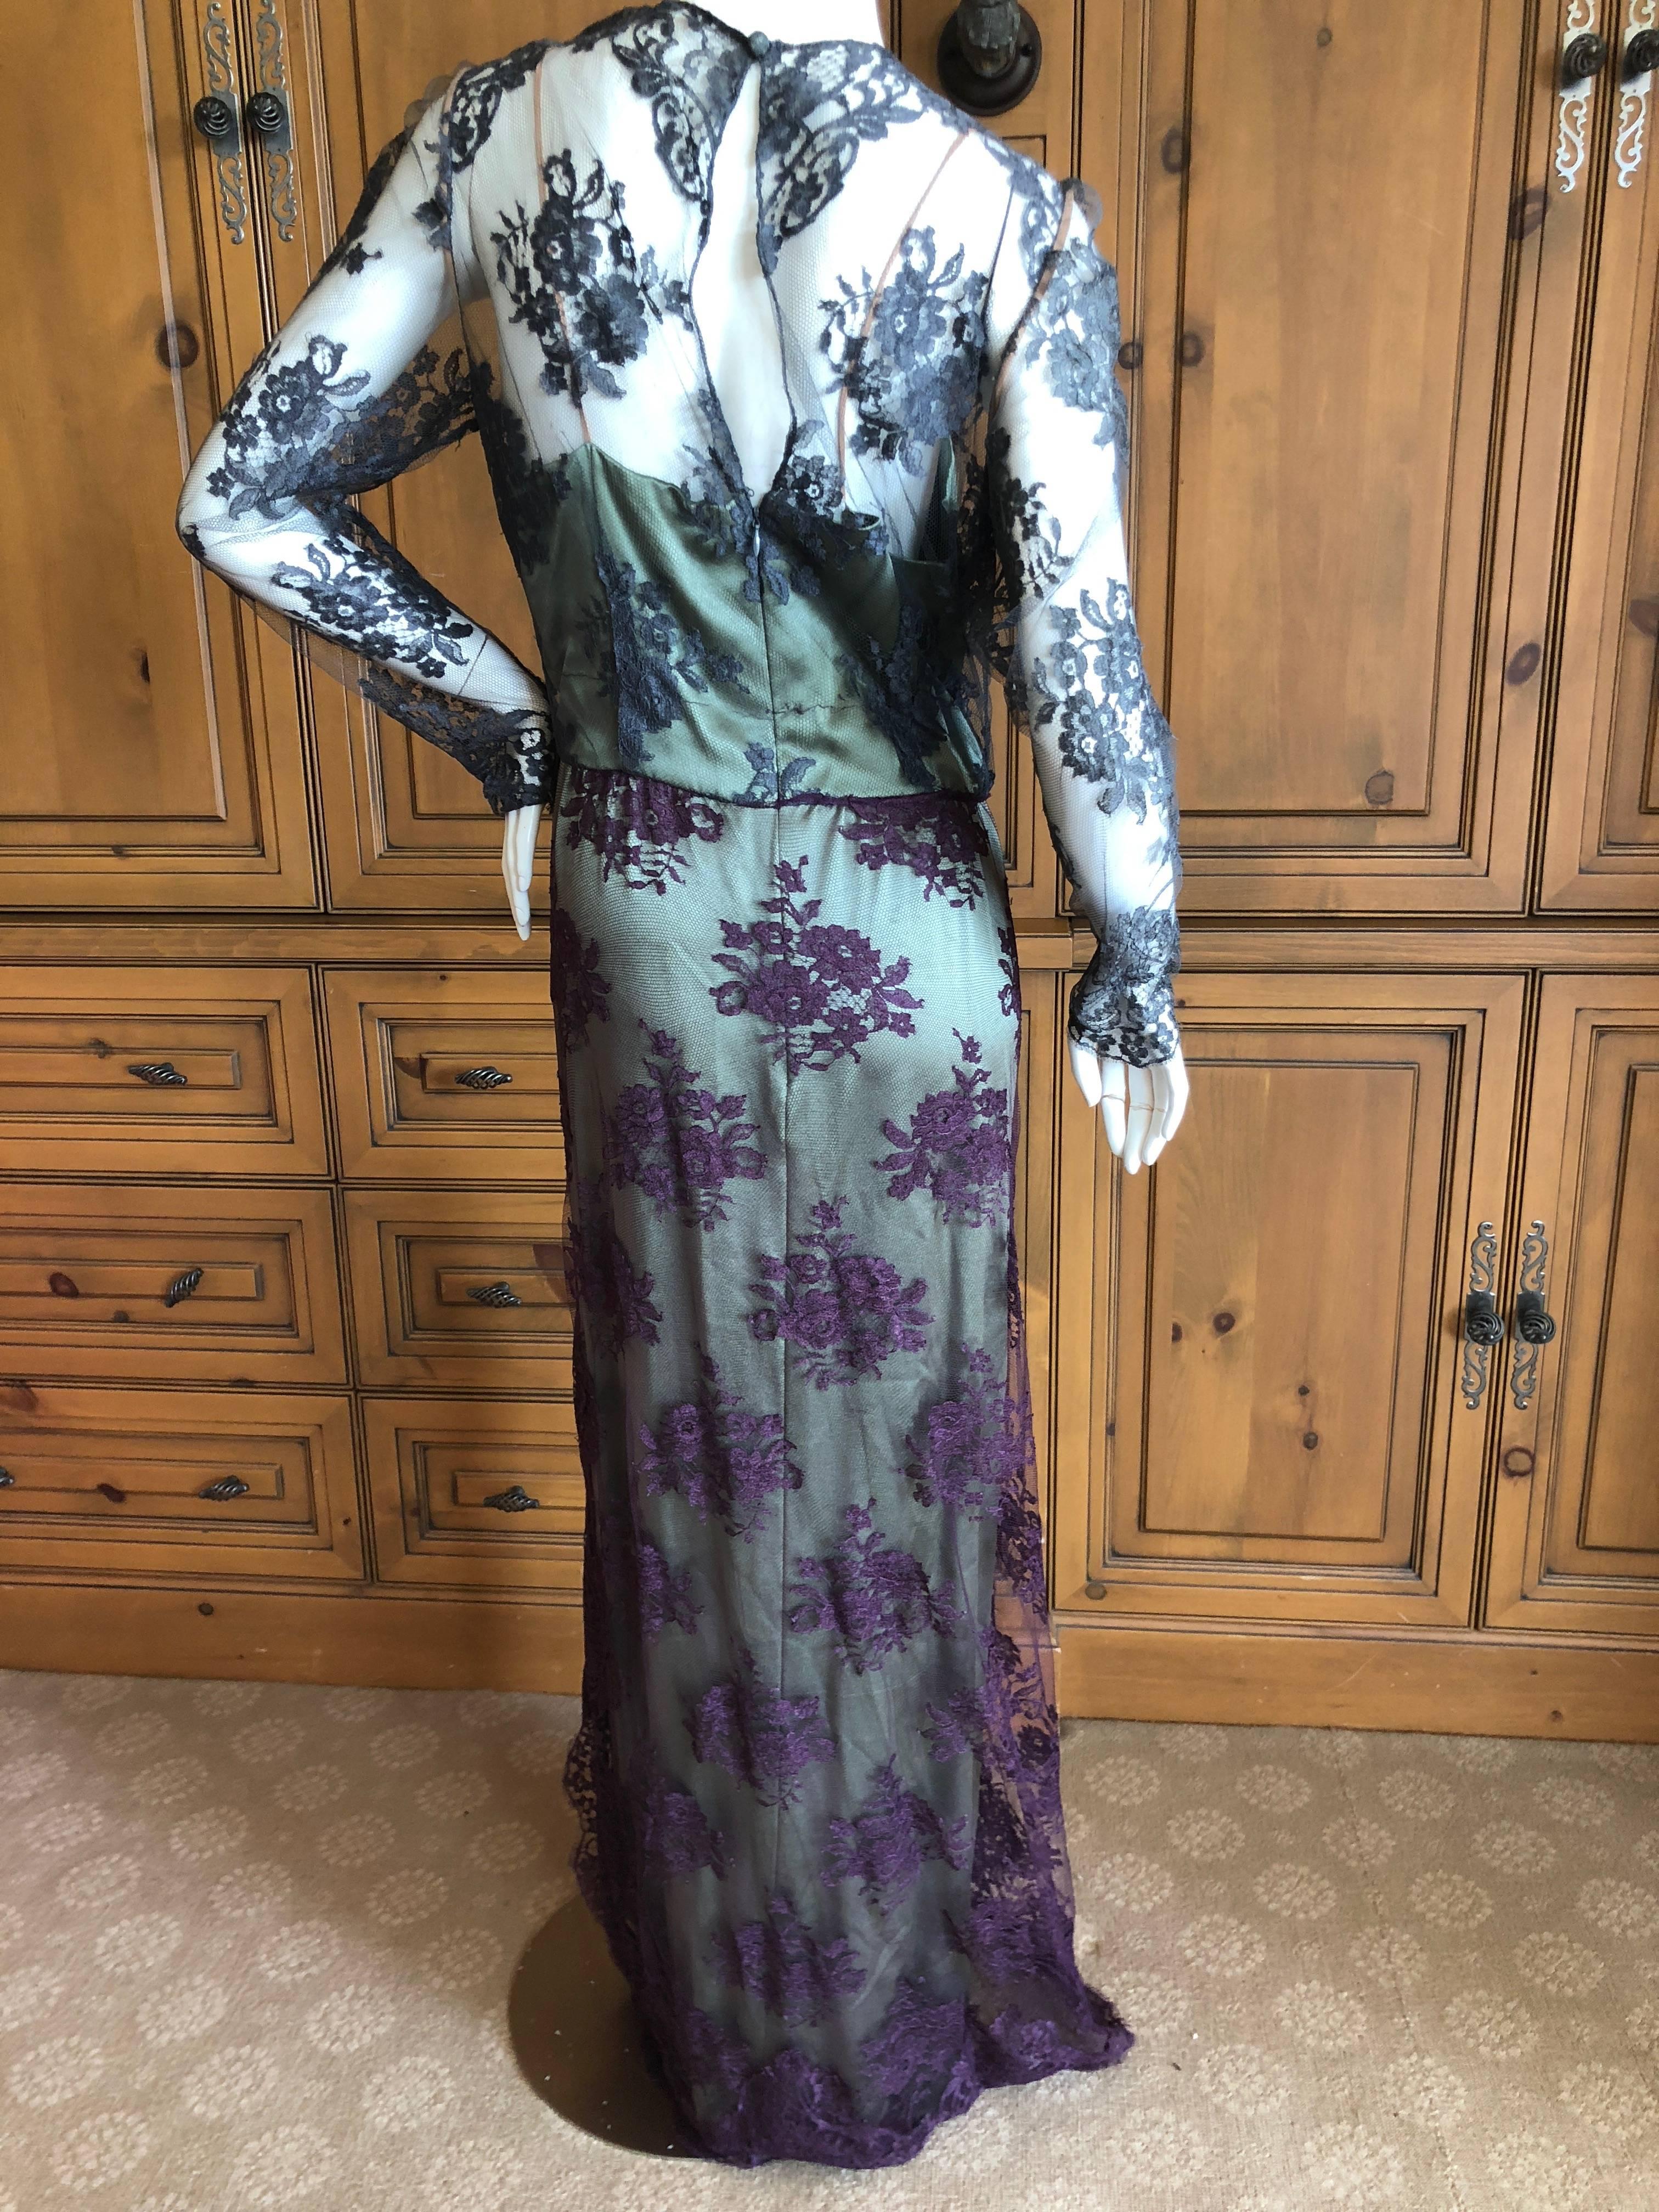 Bill Blass Vintage 1970's Silk Evening Dress with Lace Overlay Details For Sale 7